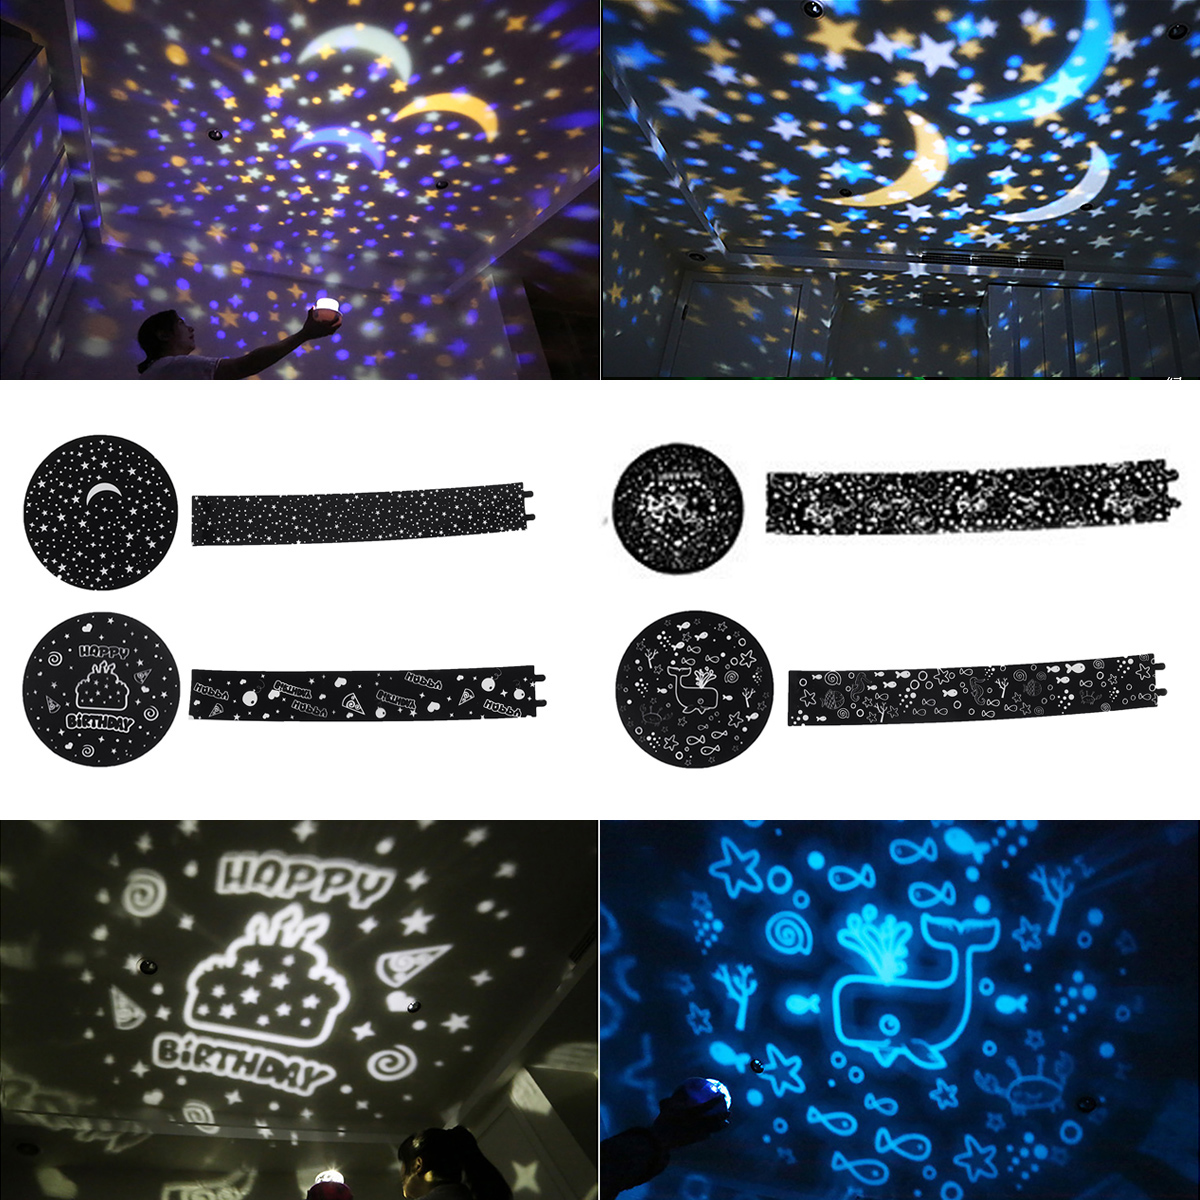 Romantic-Starry-Night-Sky-Projector-Lamp-Cosmos-Star-LED-Light-Universe-Kid-Gift-1795916-6